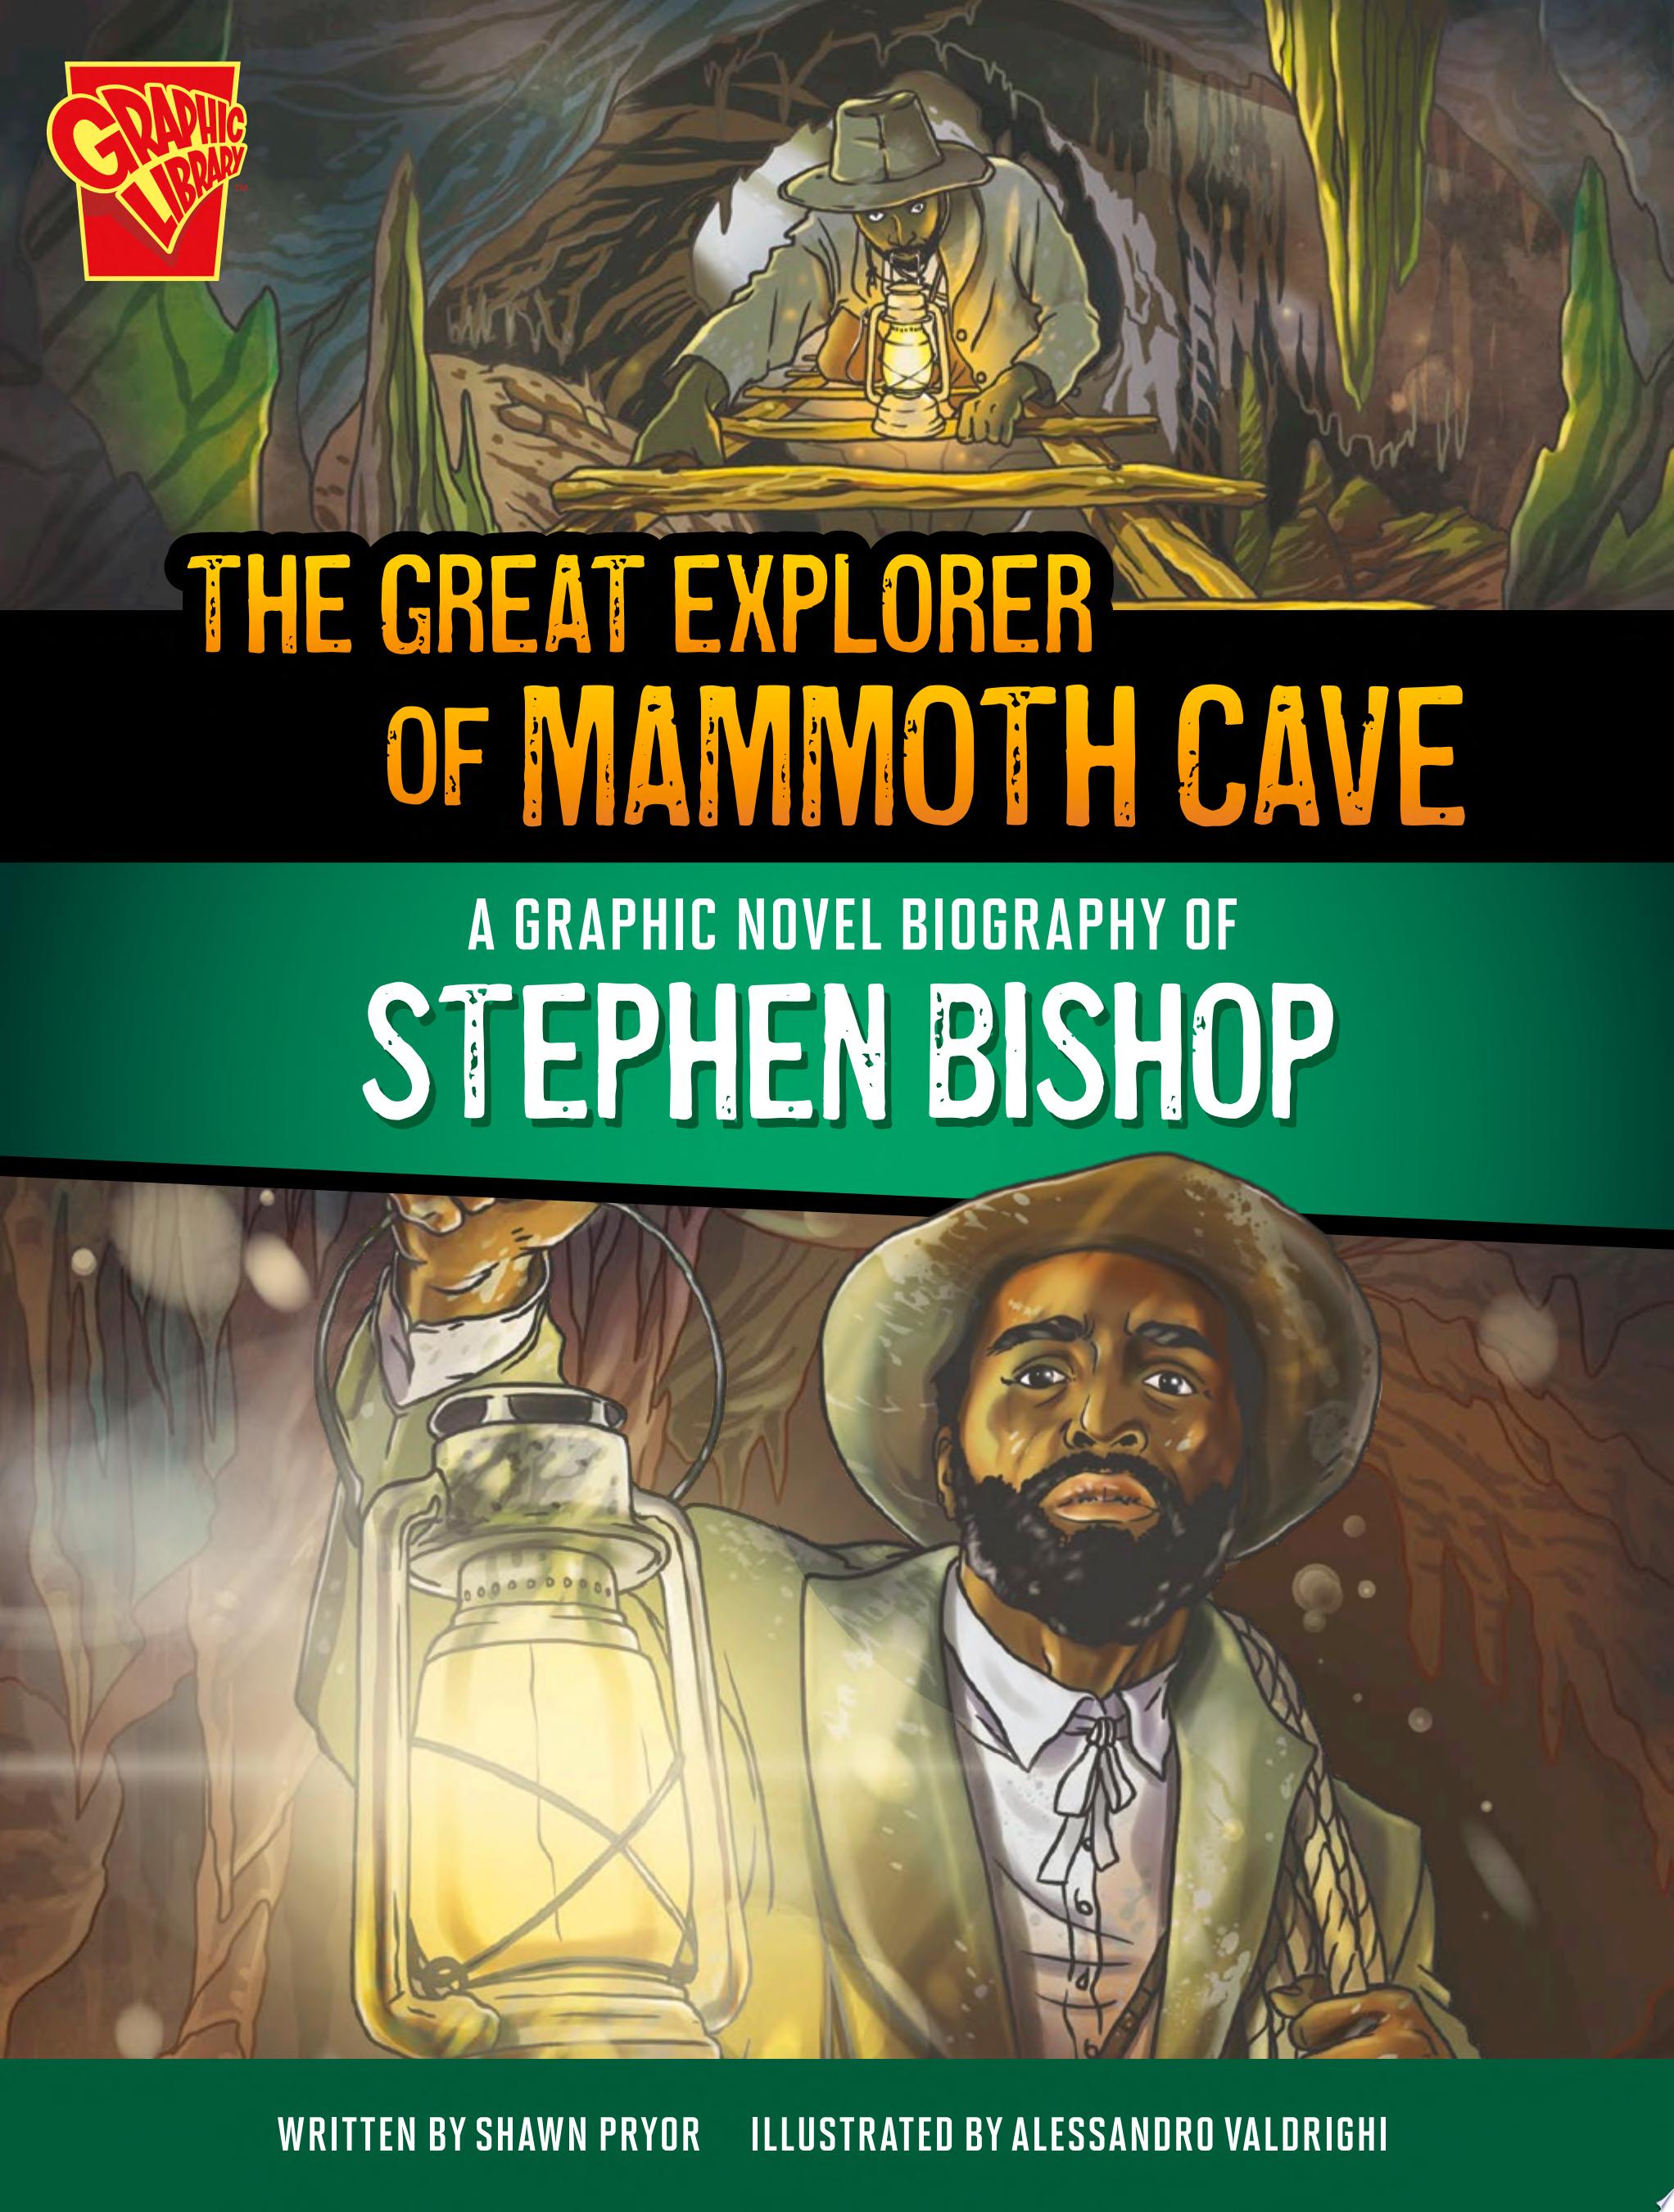 Image for "The Great Explorer of Mammoth Cave"